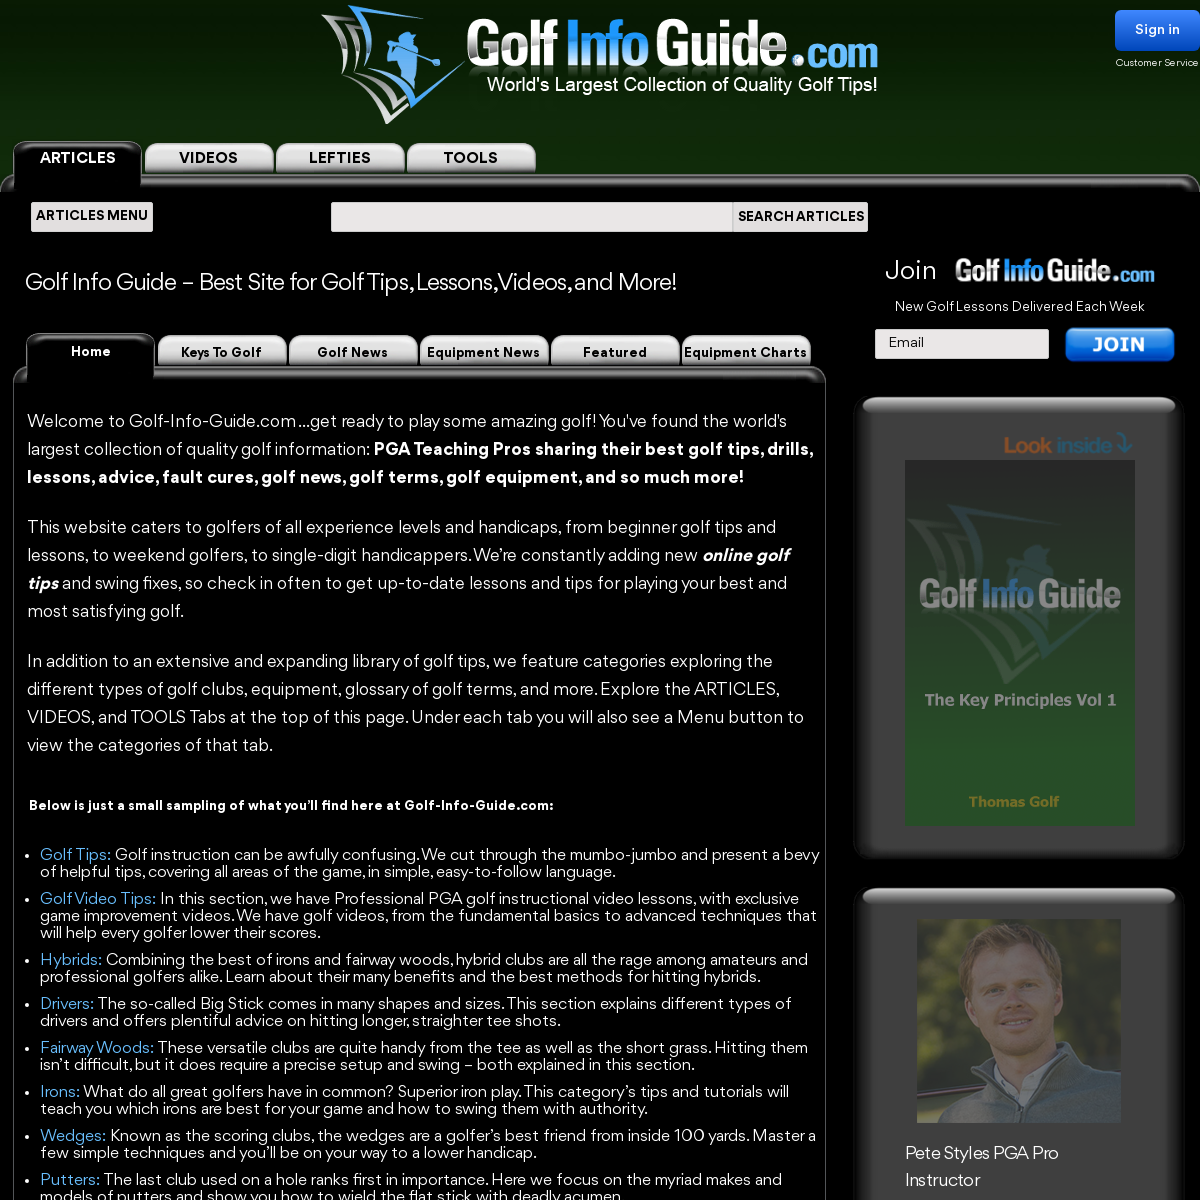 A complete backup of golf-info-guide.com